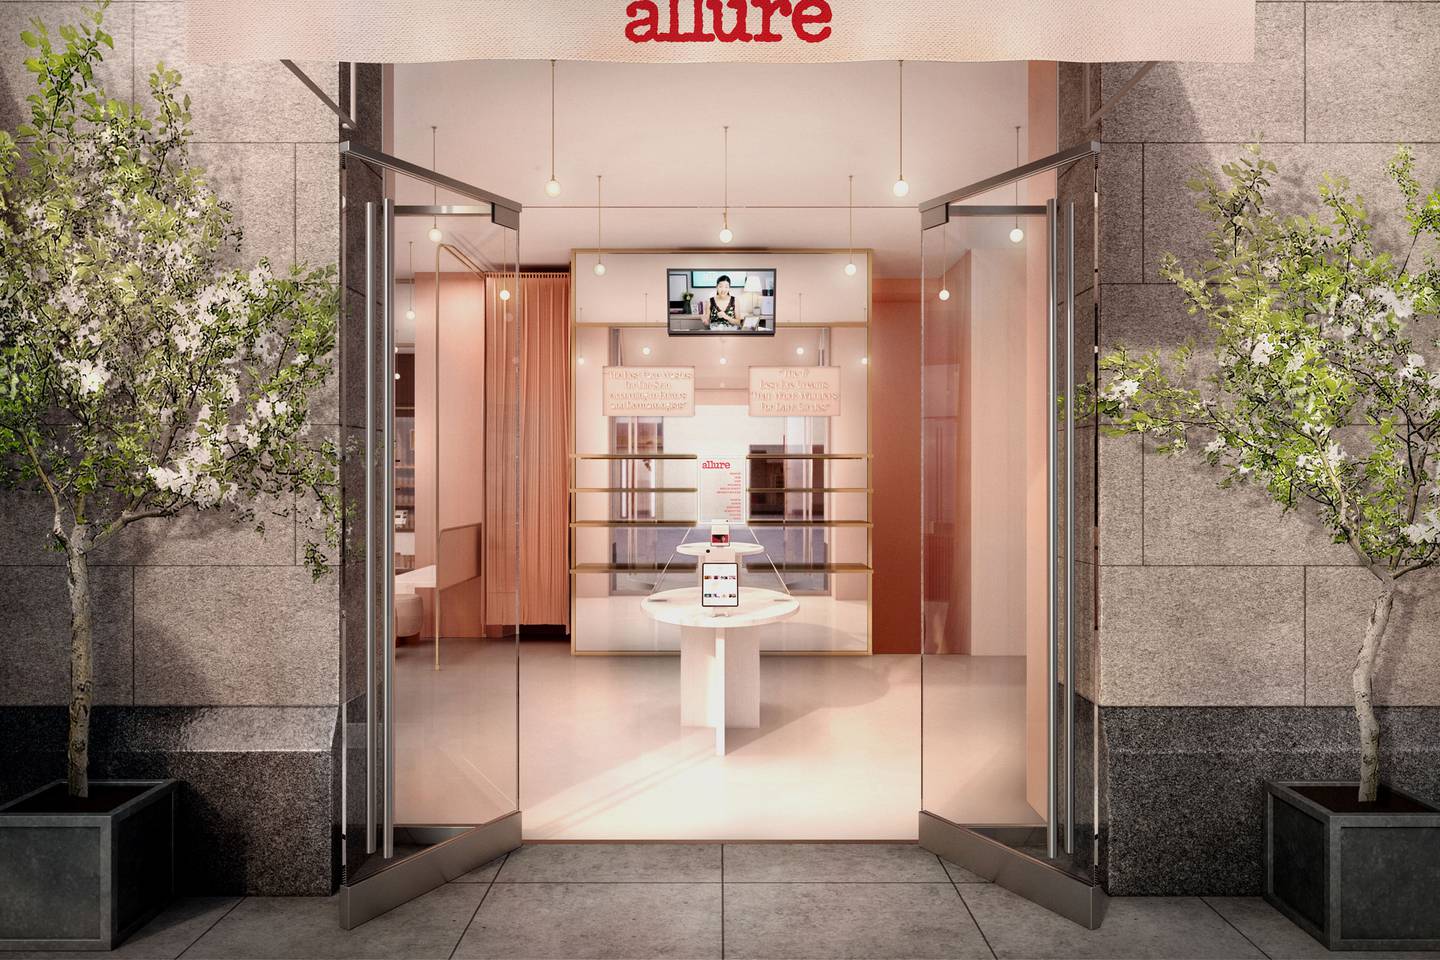 A rendering of the Allure store in Soho. Allure